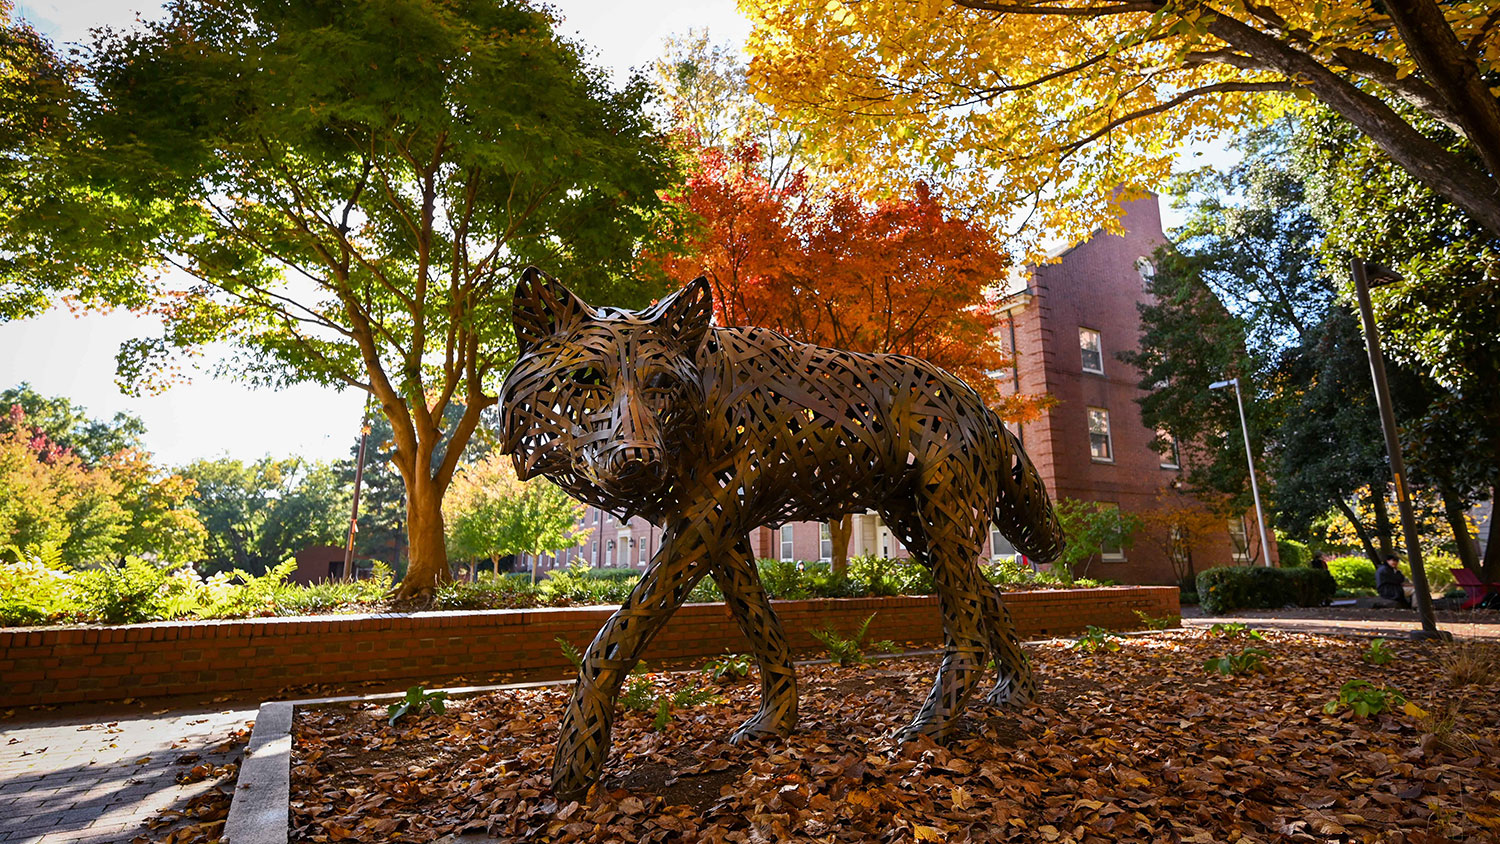 Decorative image of a metal wolf statue amounts autumn trees on NC State's campus.